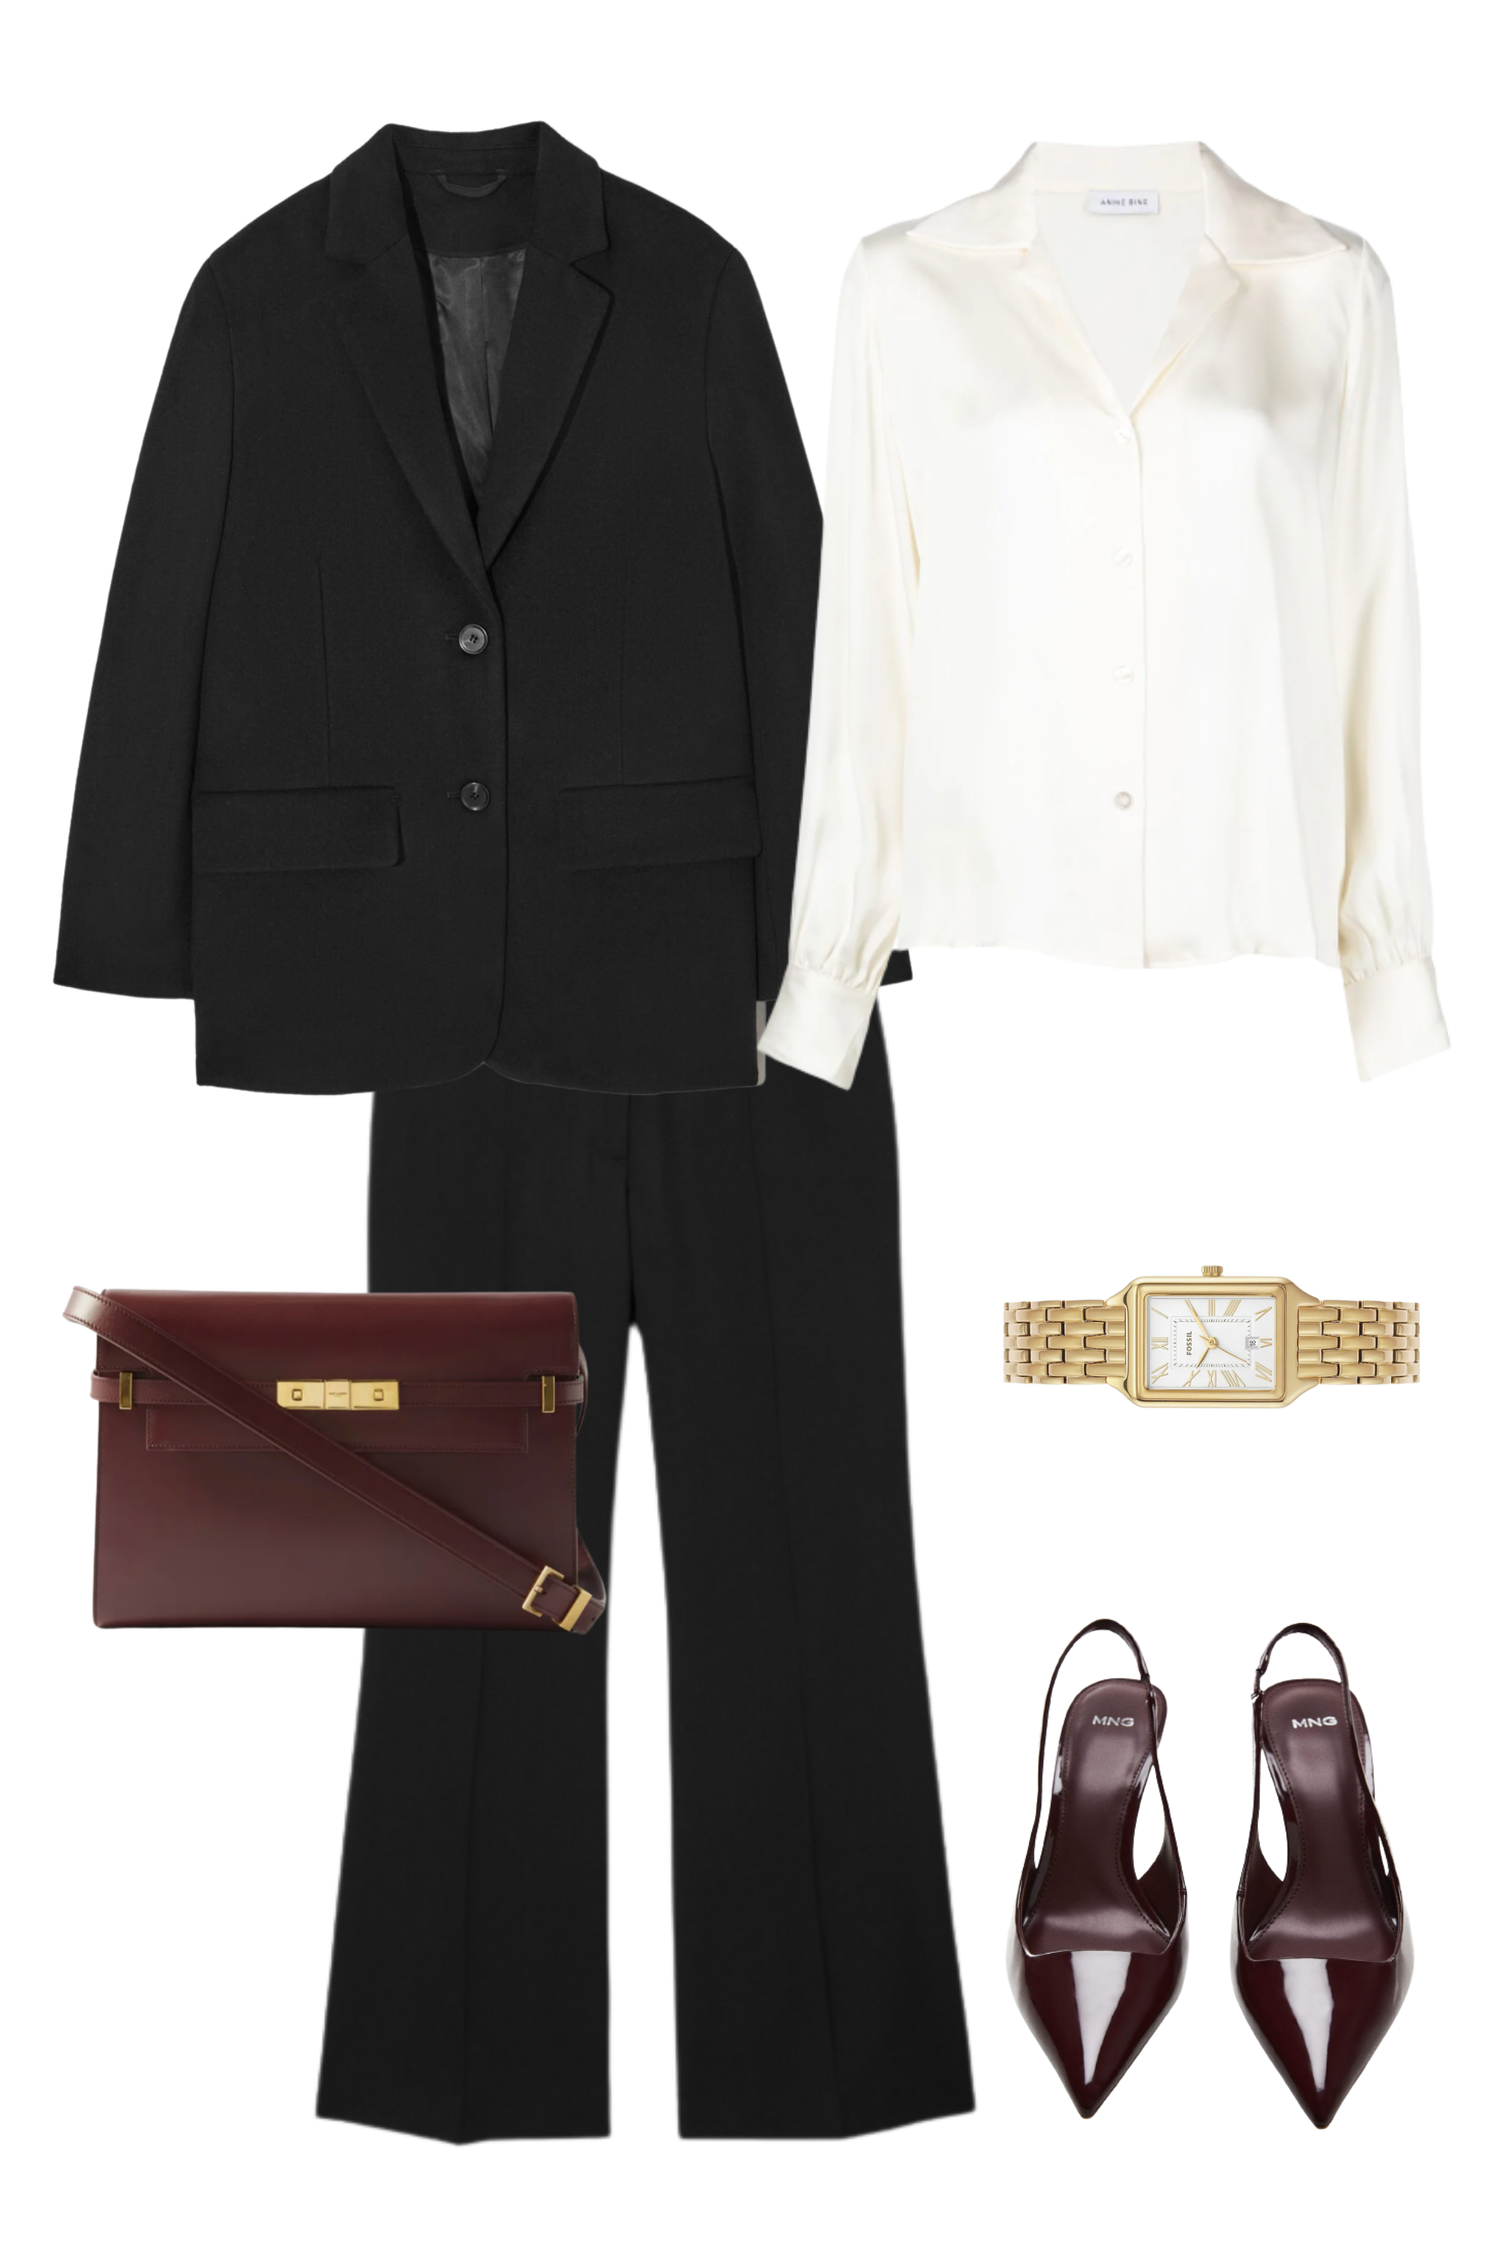 7 Ways to Style a Black Blazer for Fall